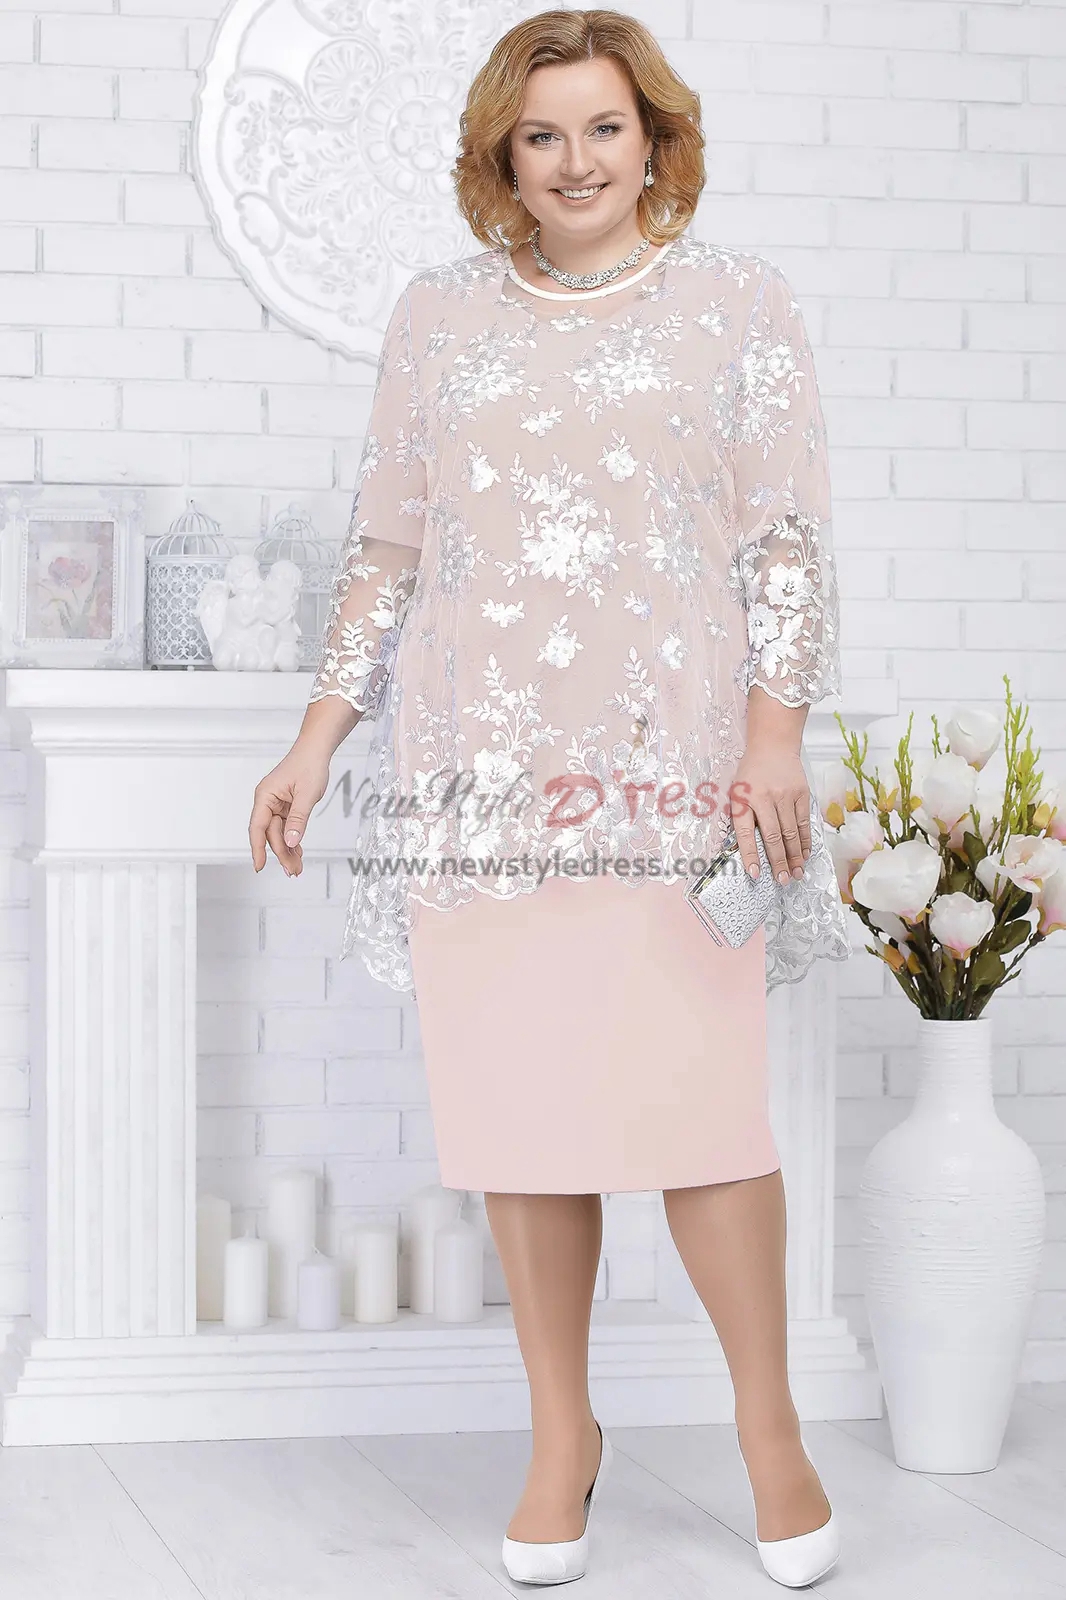 plus size mother of the bride outfit